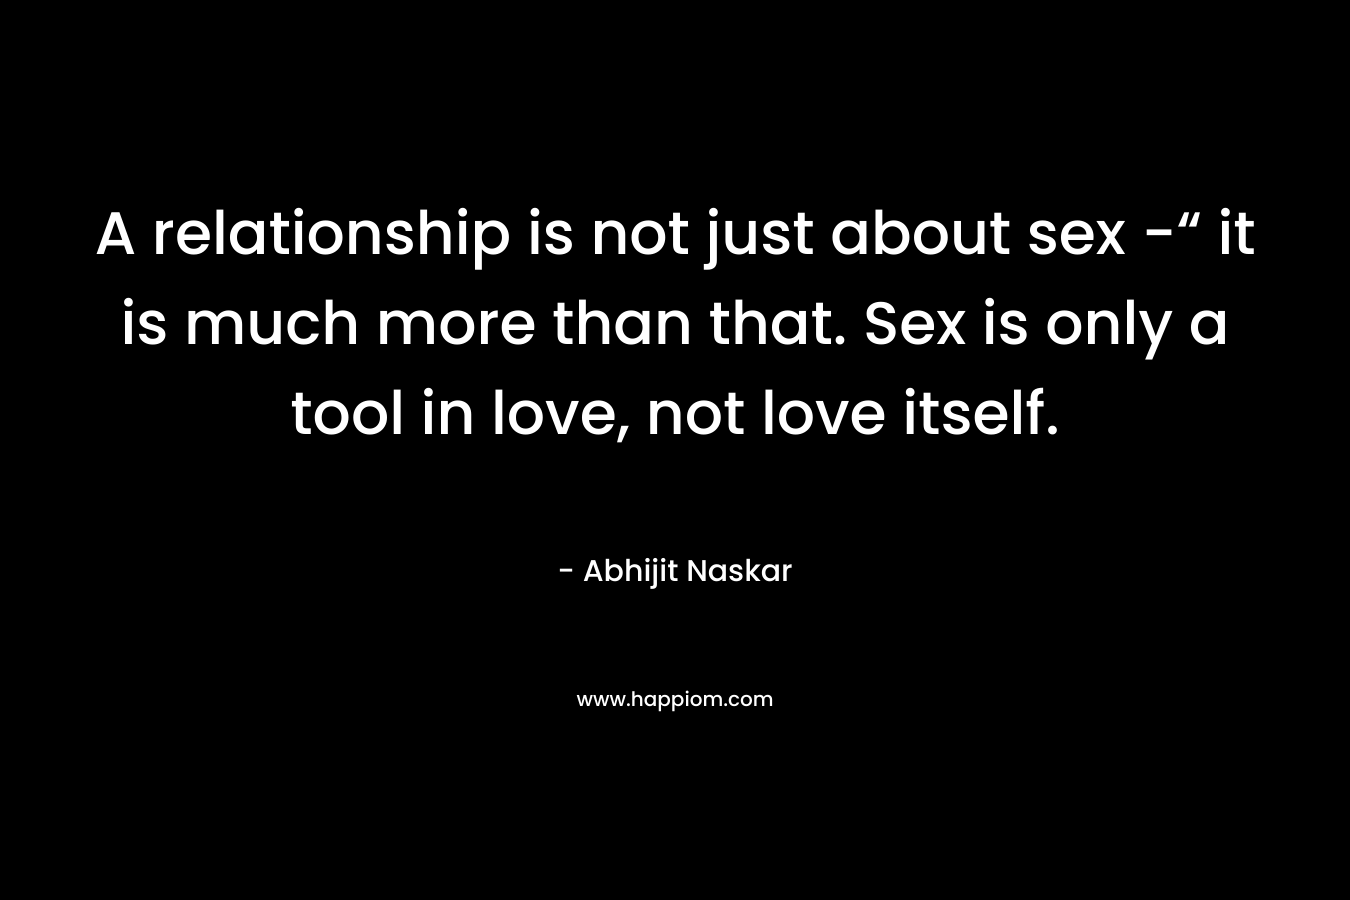 A relationship is not just about sex -“ it is much more than that. Sex is only a tool in love, not love itself.